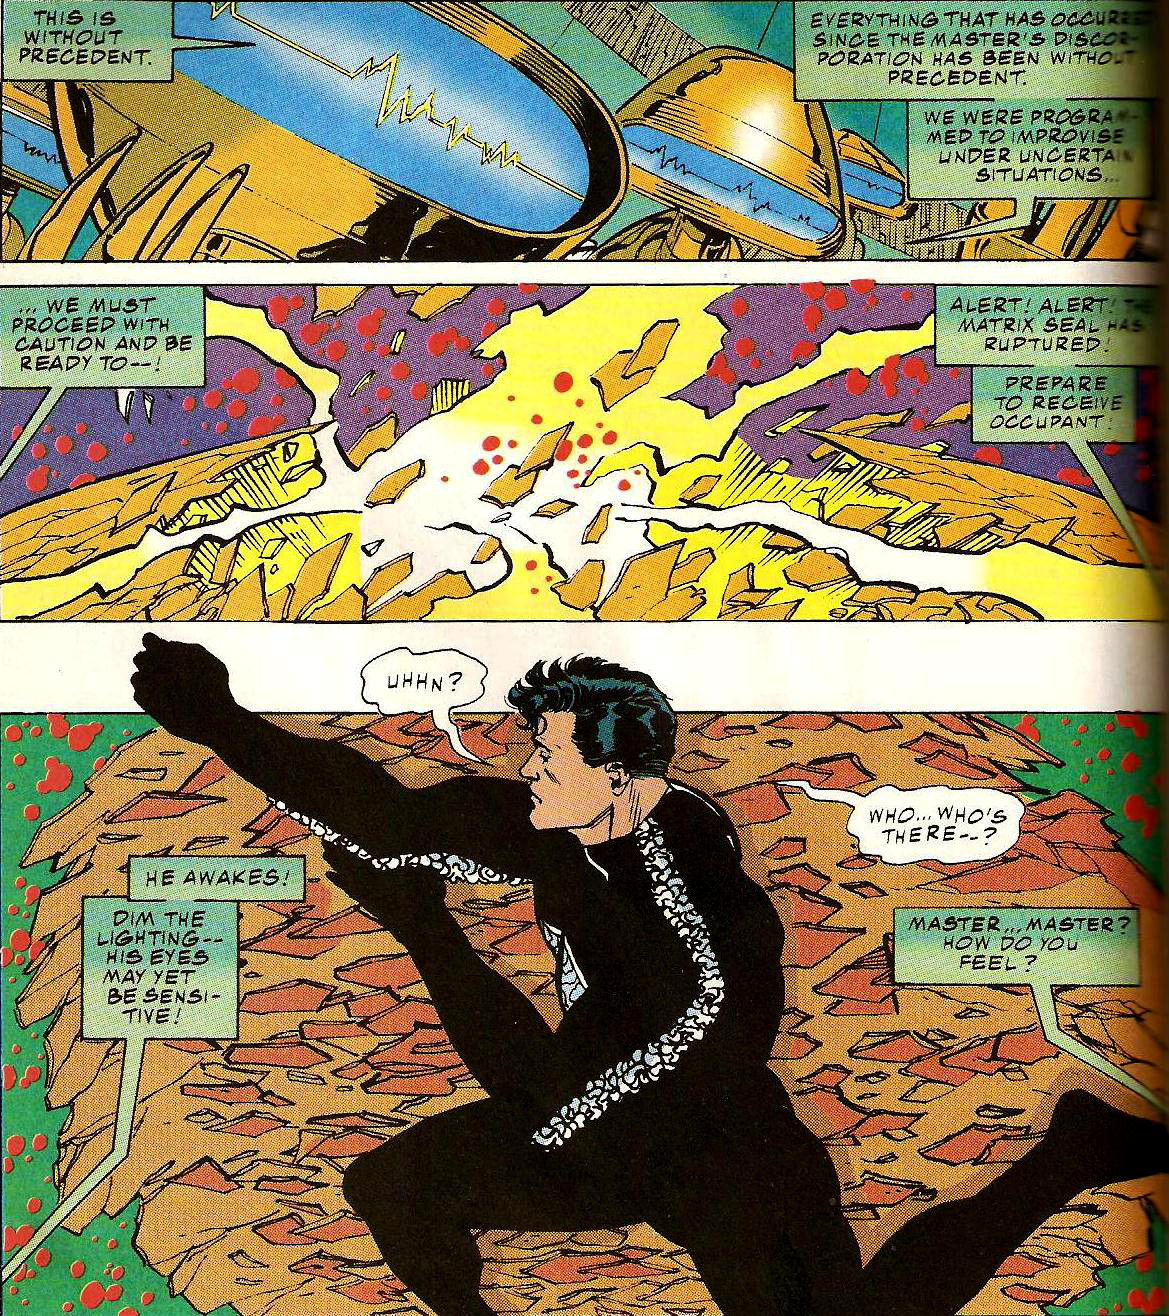 From Action Comics (Vol. 1) #689 (1993)